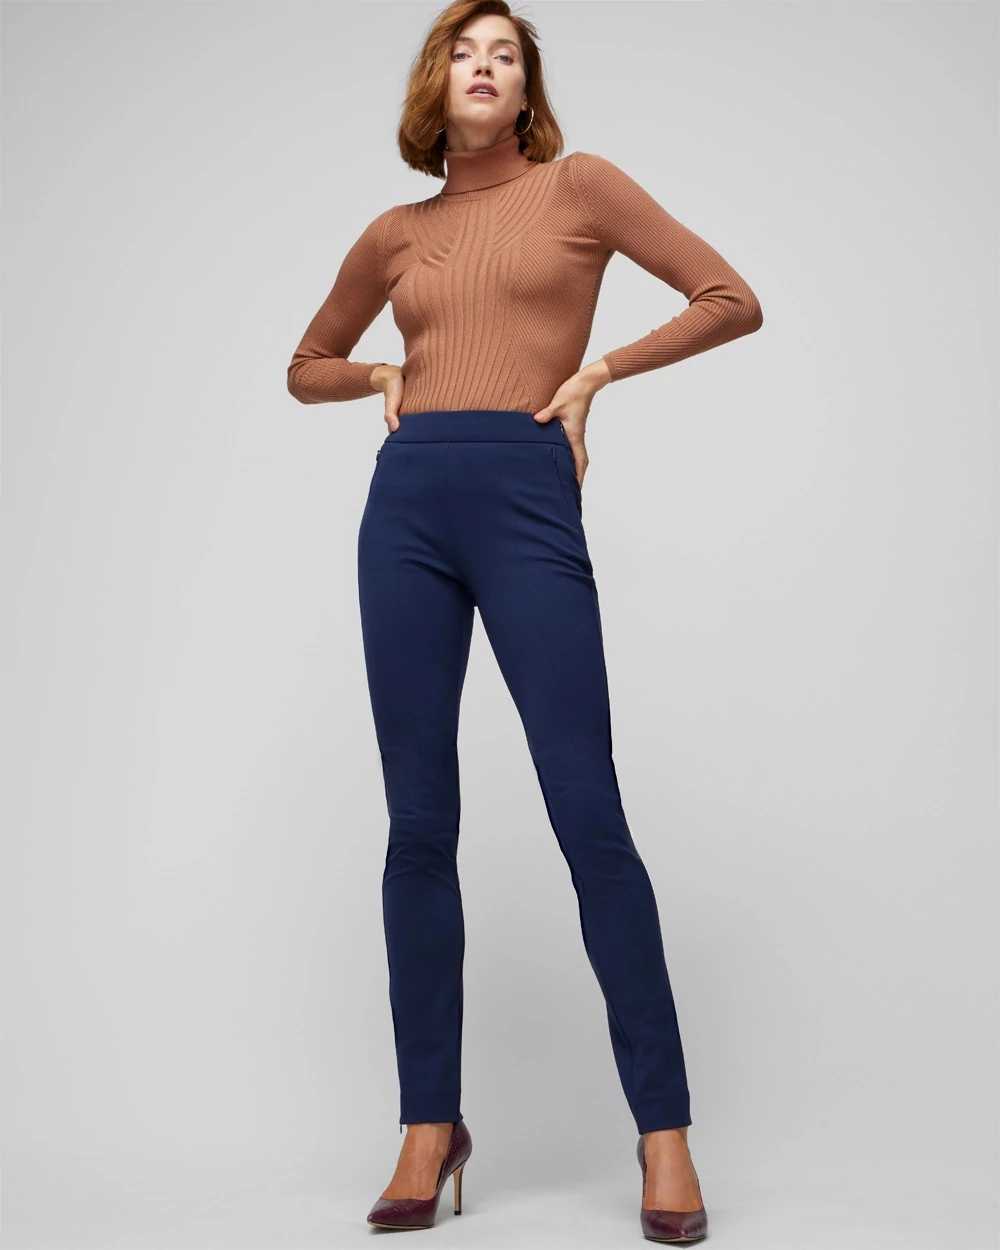 Luxe Stretch Skinny Pant